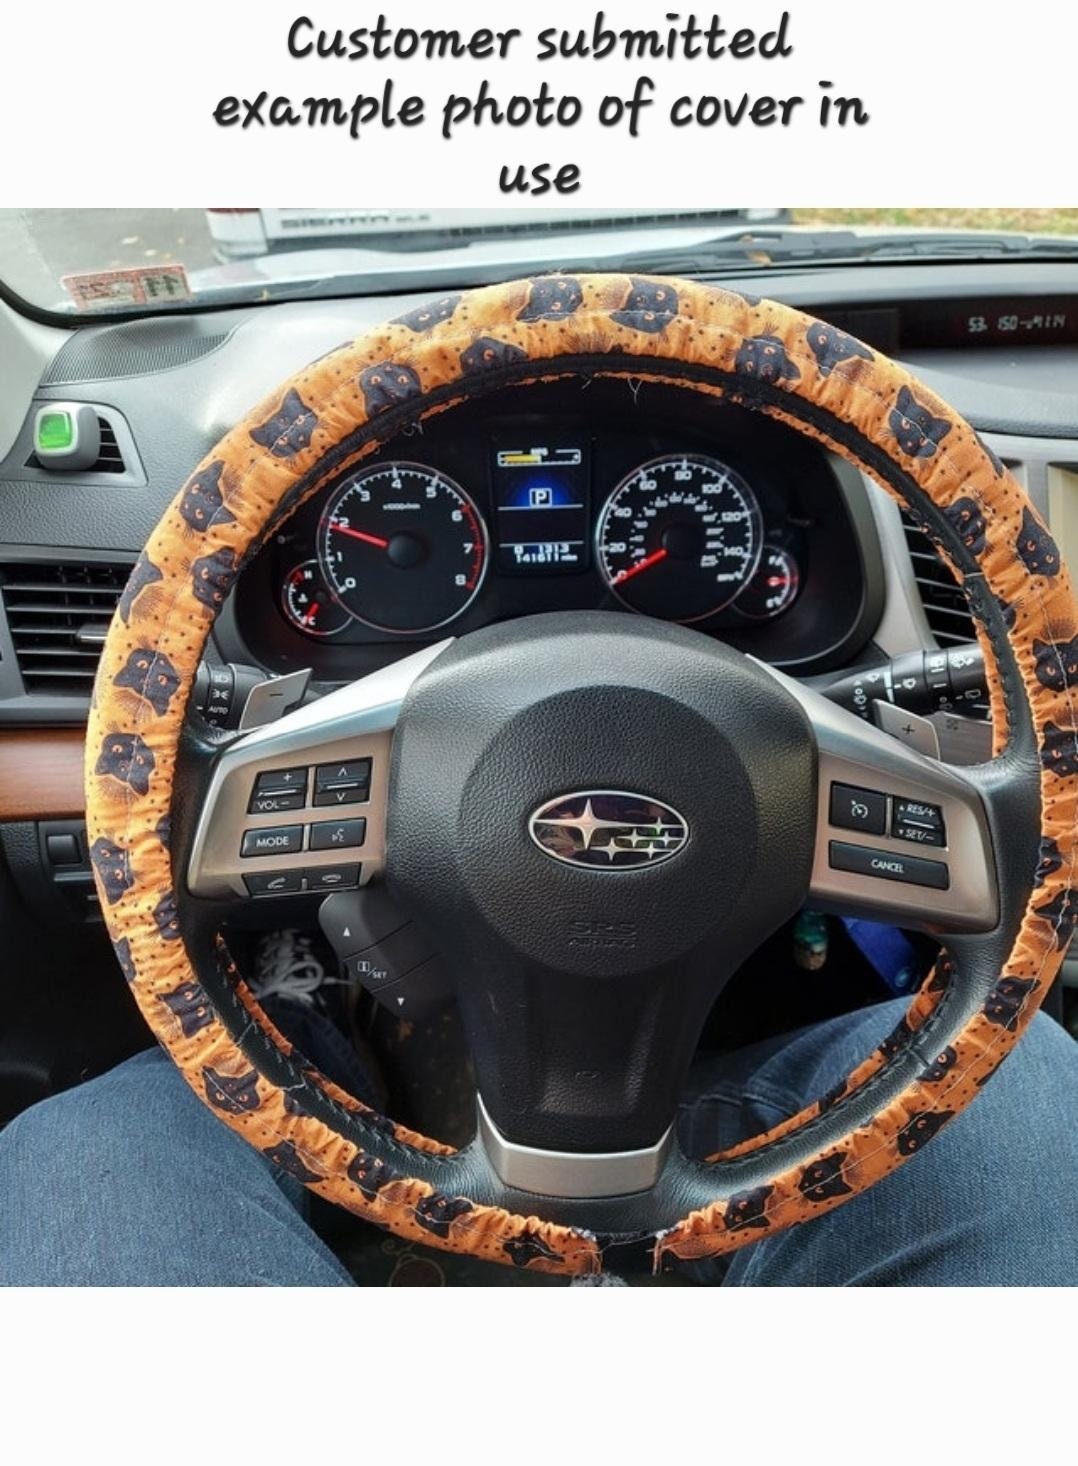 Deer Steering Wheel Cover, Custom Car Accessories, 100% Cotton Washable - Harlow's Store and Garden Gifts